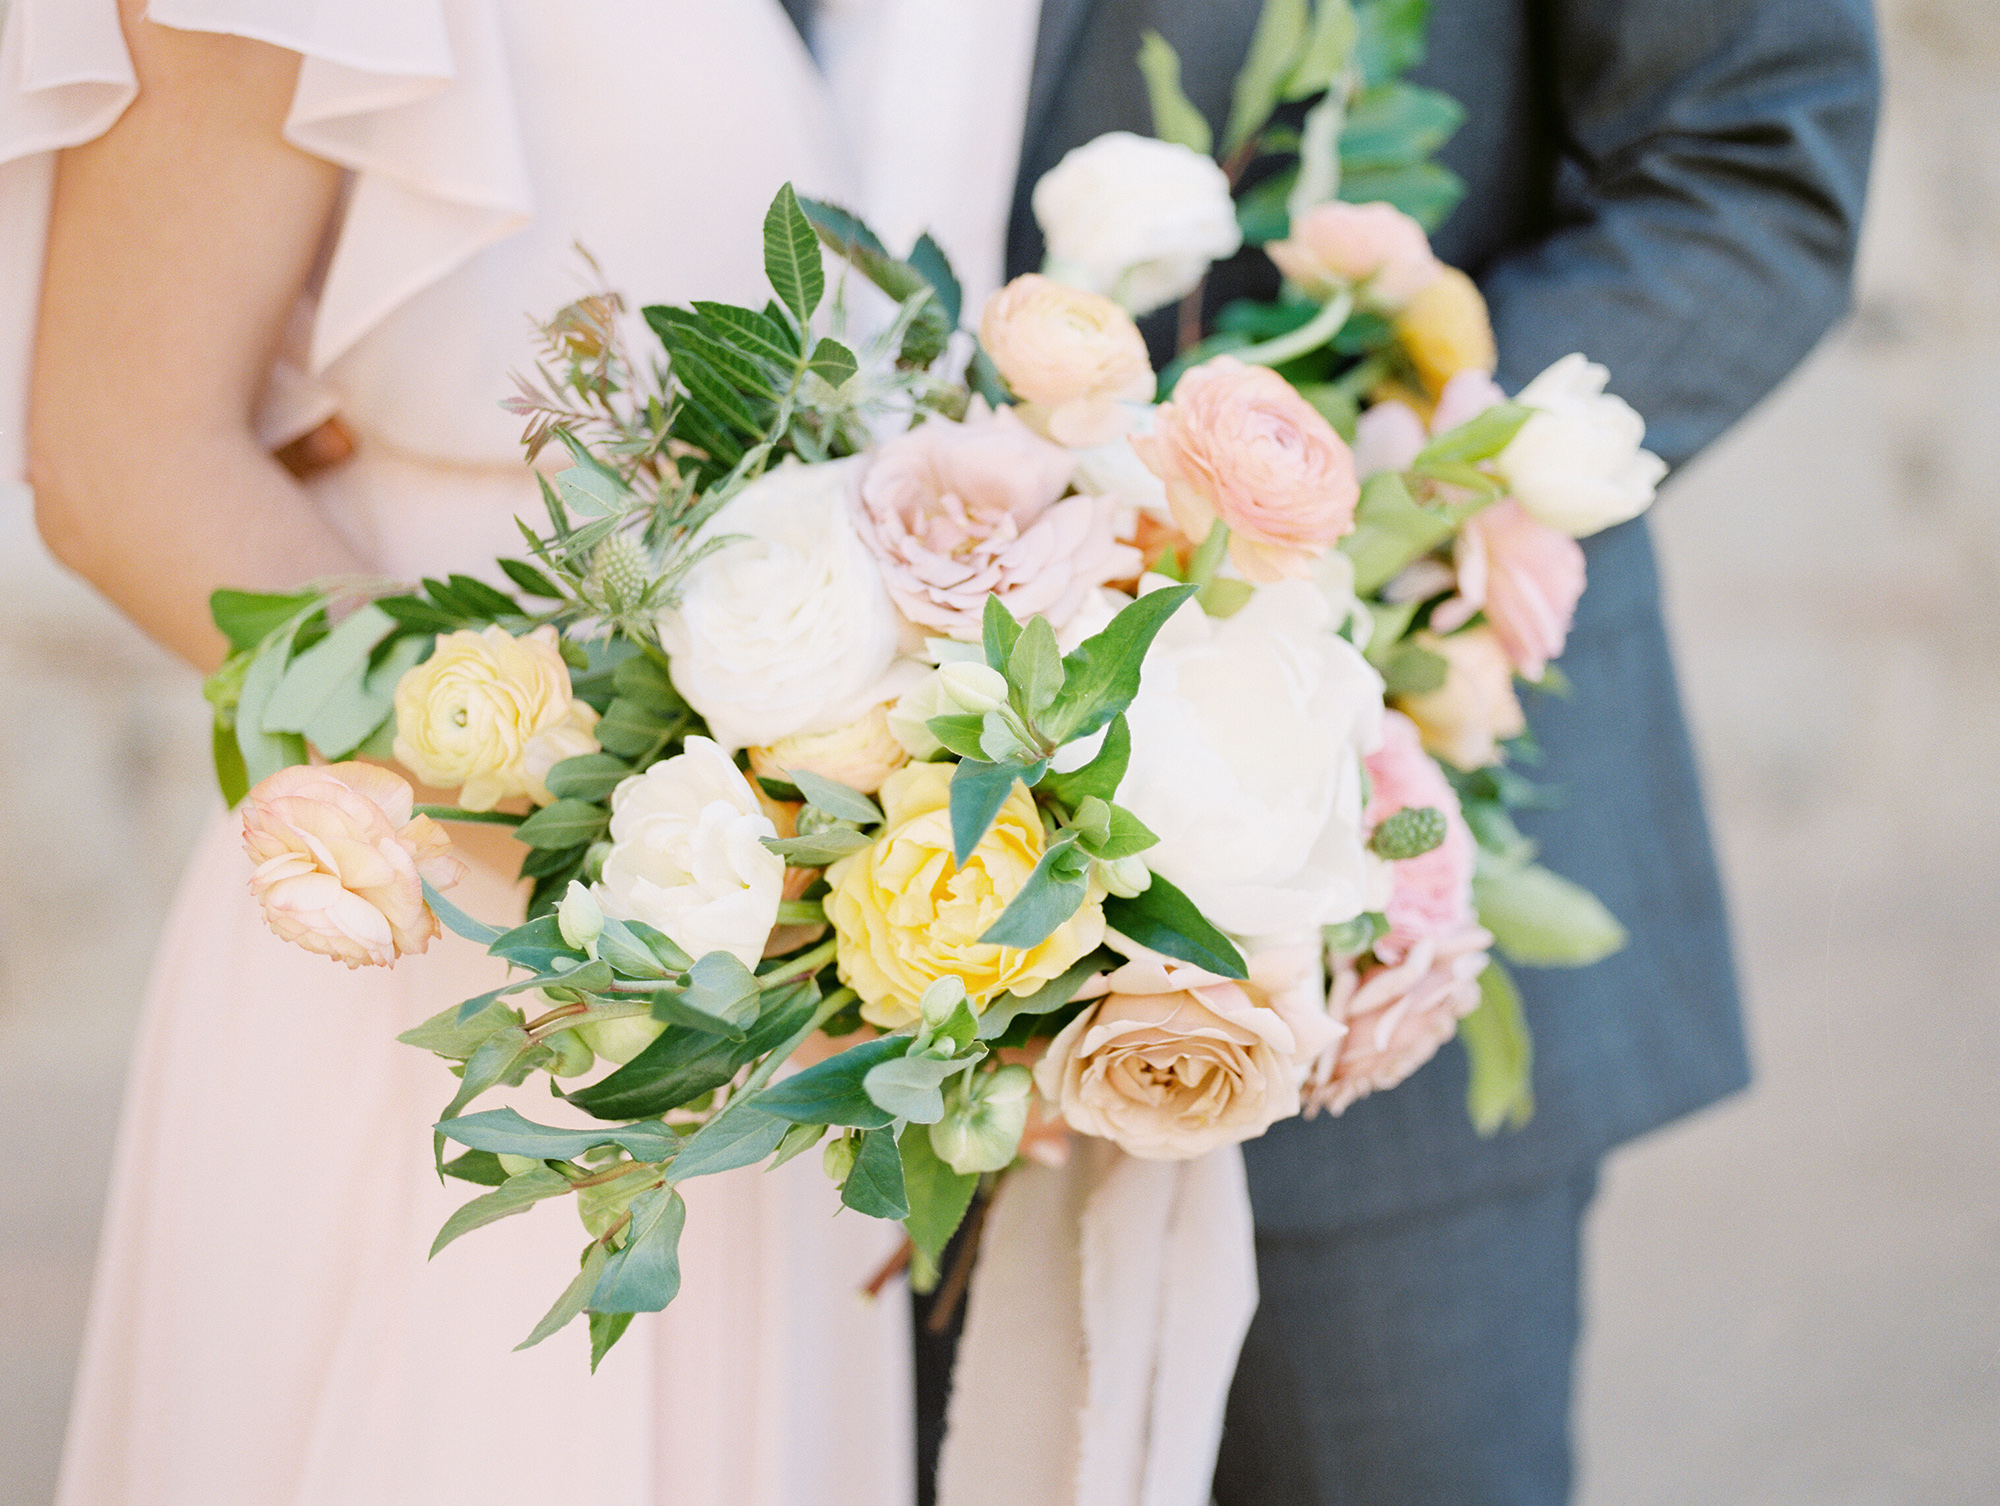 Garden roses crafted by Bellatula Floral photographed by San Juan Capistrano wedding photographer Tenth & Grace.